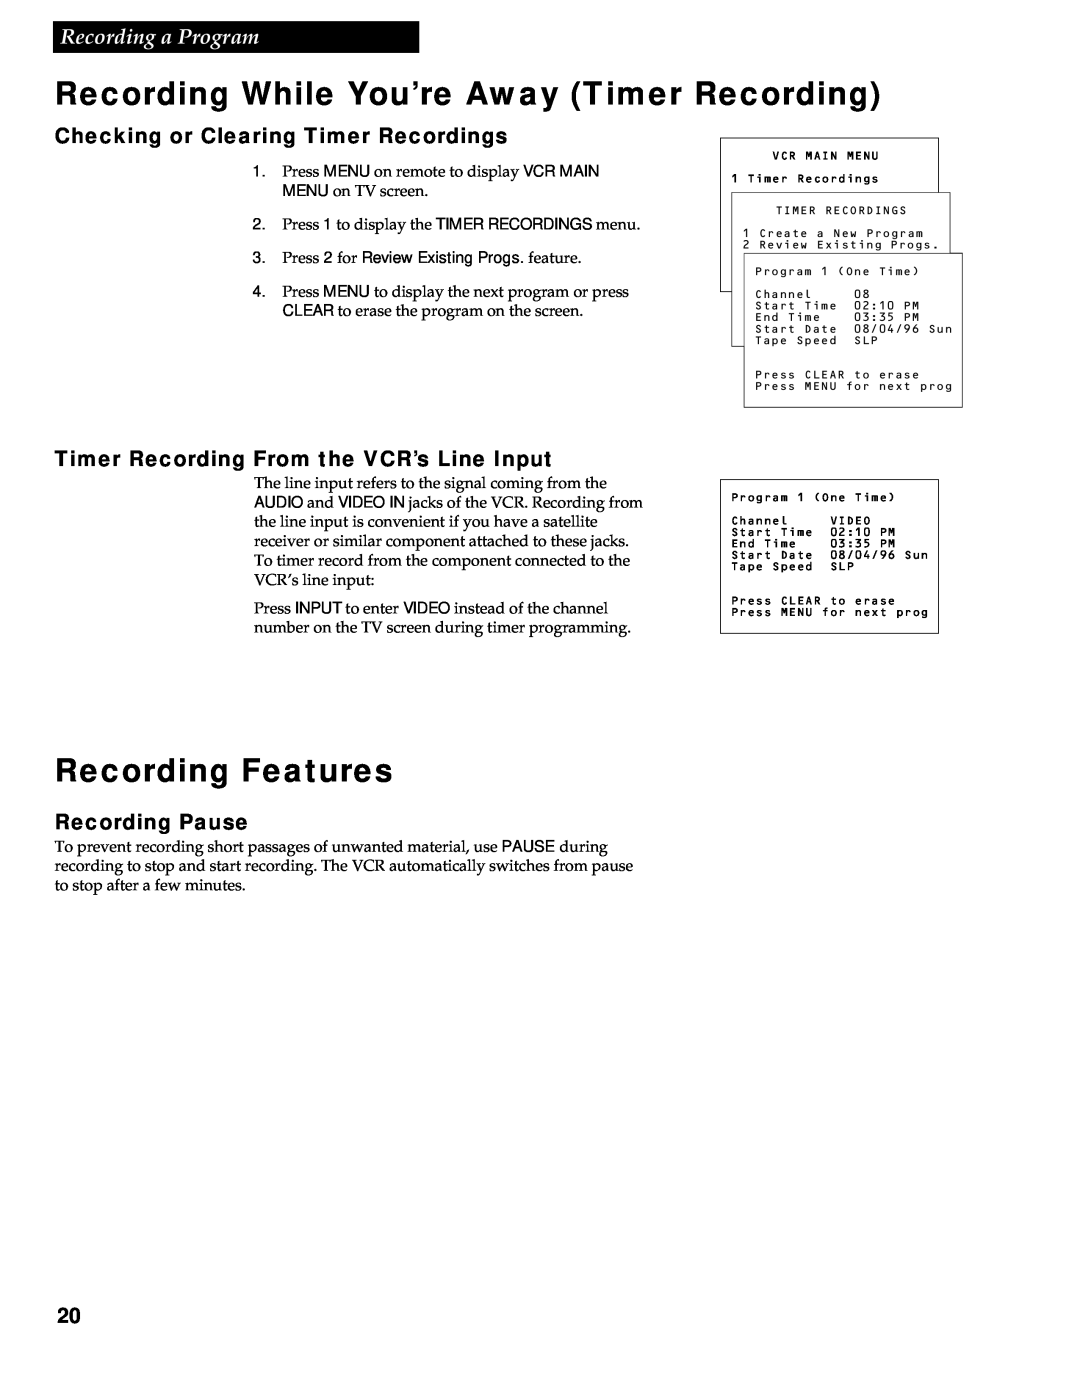 RCA VR336 manual Recording Features, Checking or Clearing Timer Recordings, Timer Recording From the VCR’s Line Input 